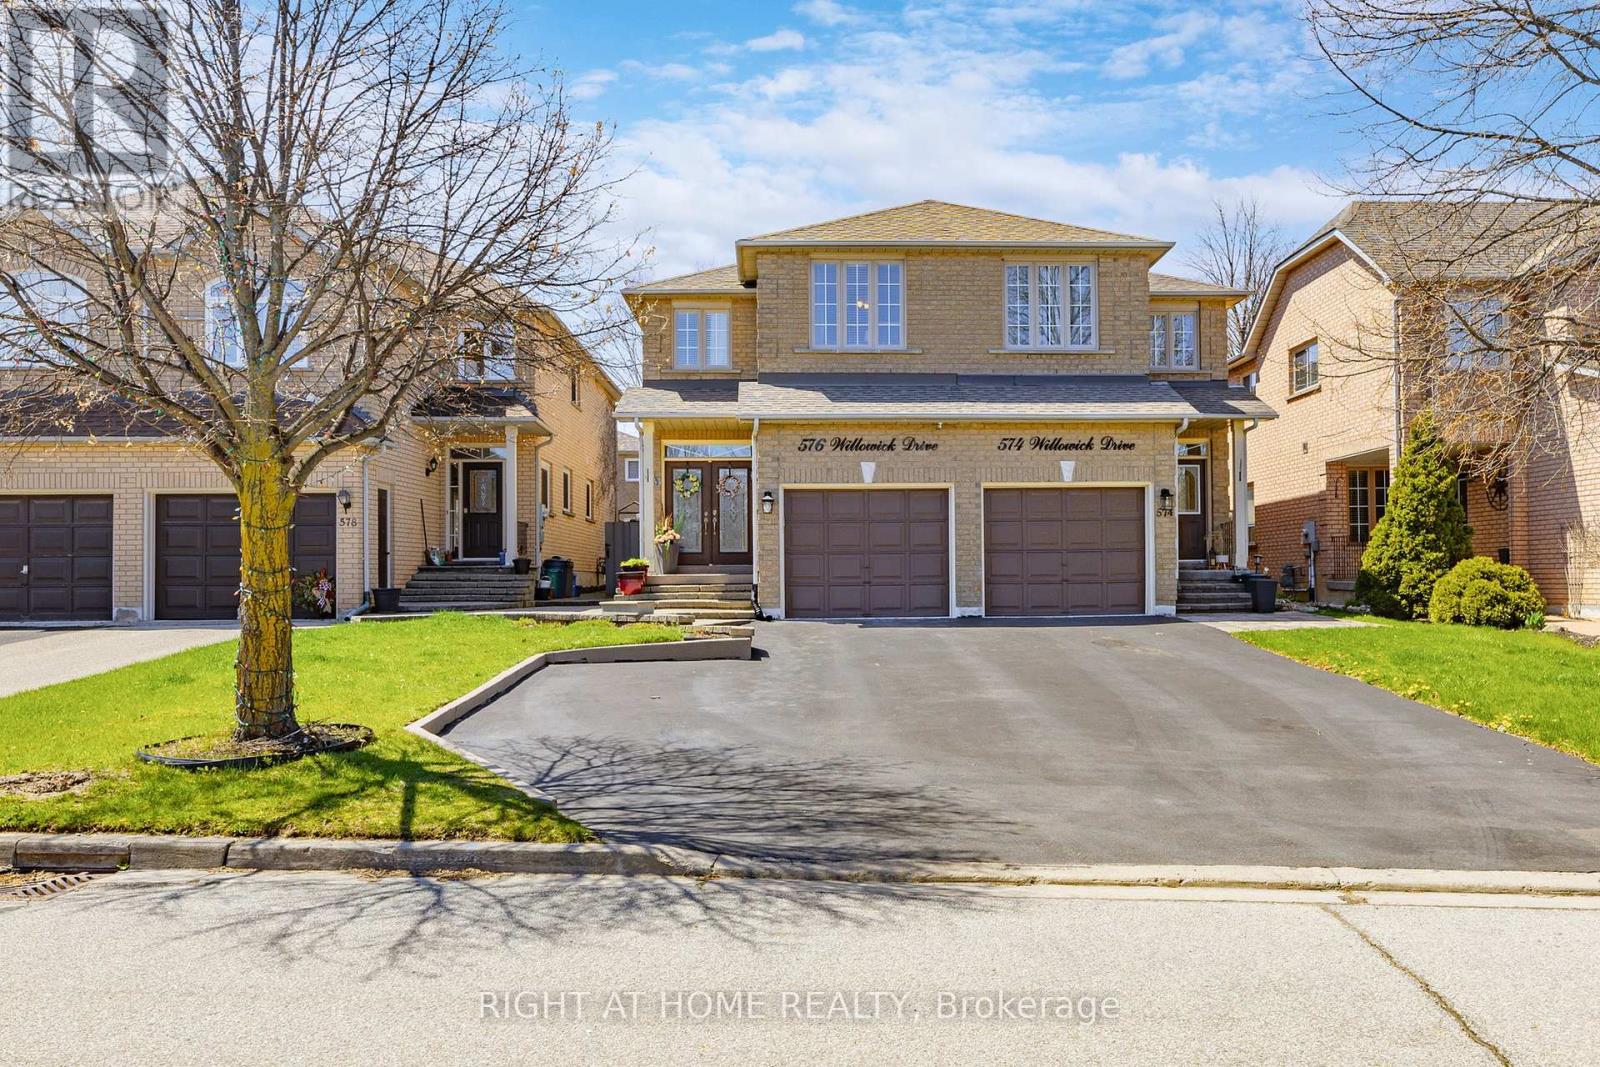 576 WILLOWICK DR, newmarket, Ontario